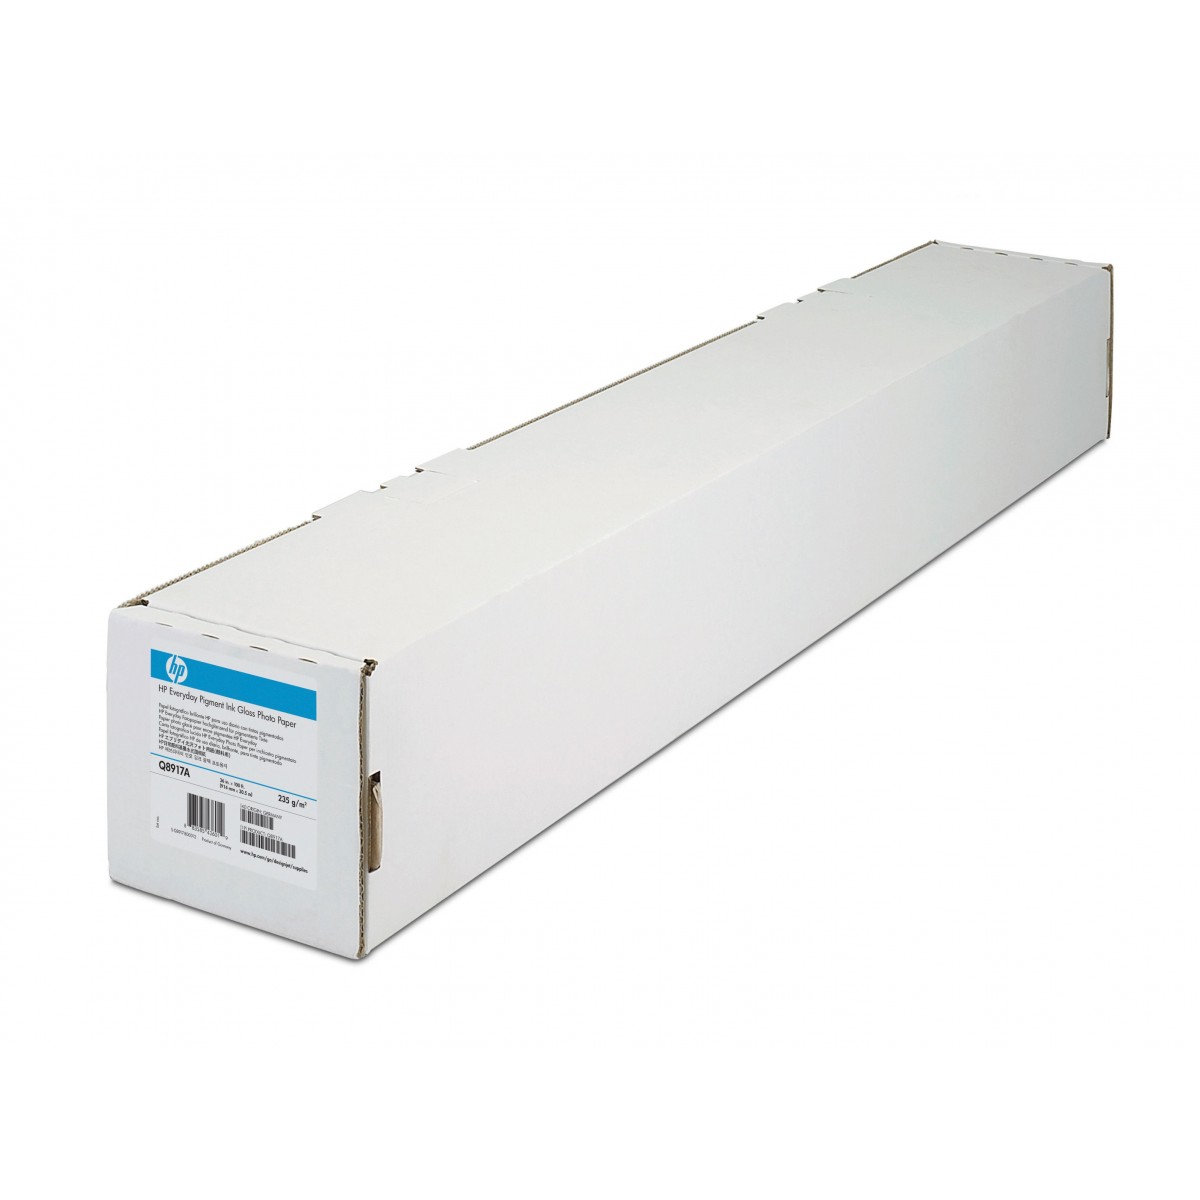 HP Everyday Instant-dry Satin Photo Paper-1067 mm x 30.5 m (42 in x 100 ft),  9.1 mil,  235 g/m2, Q8922A